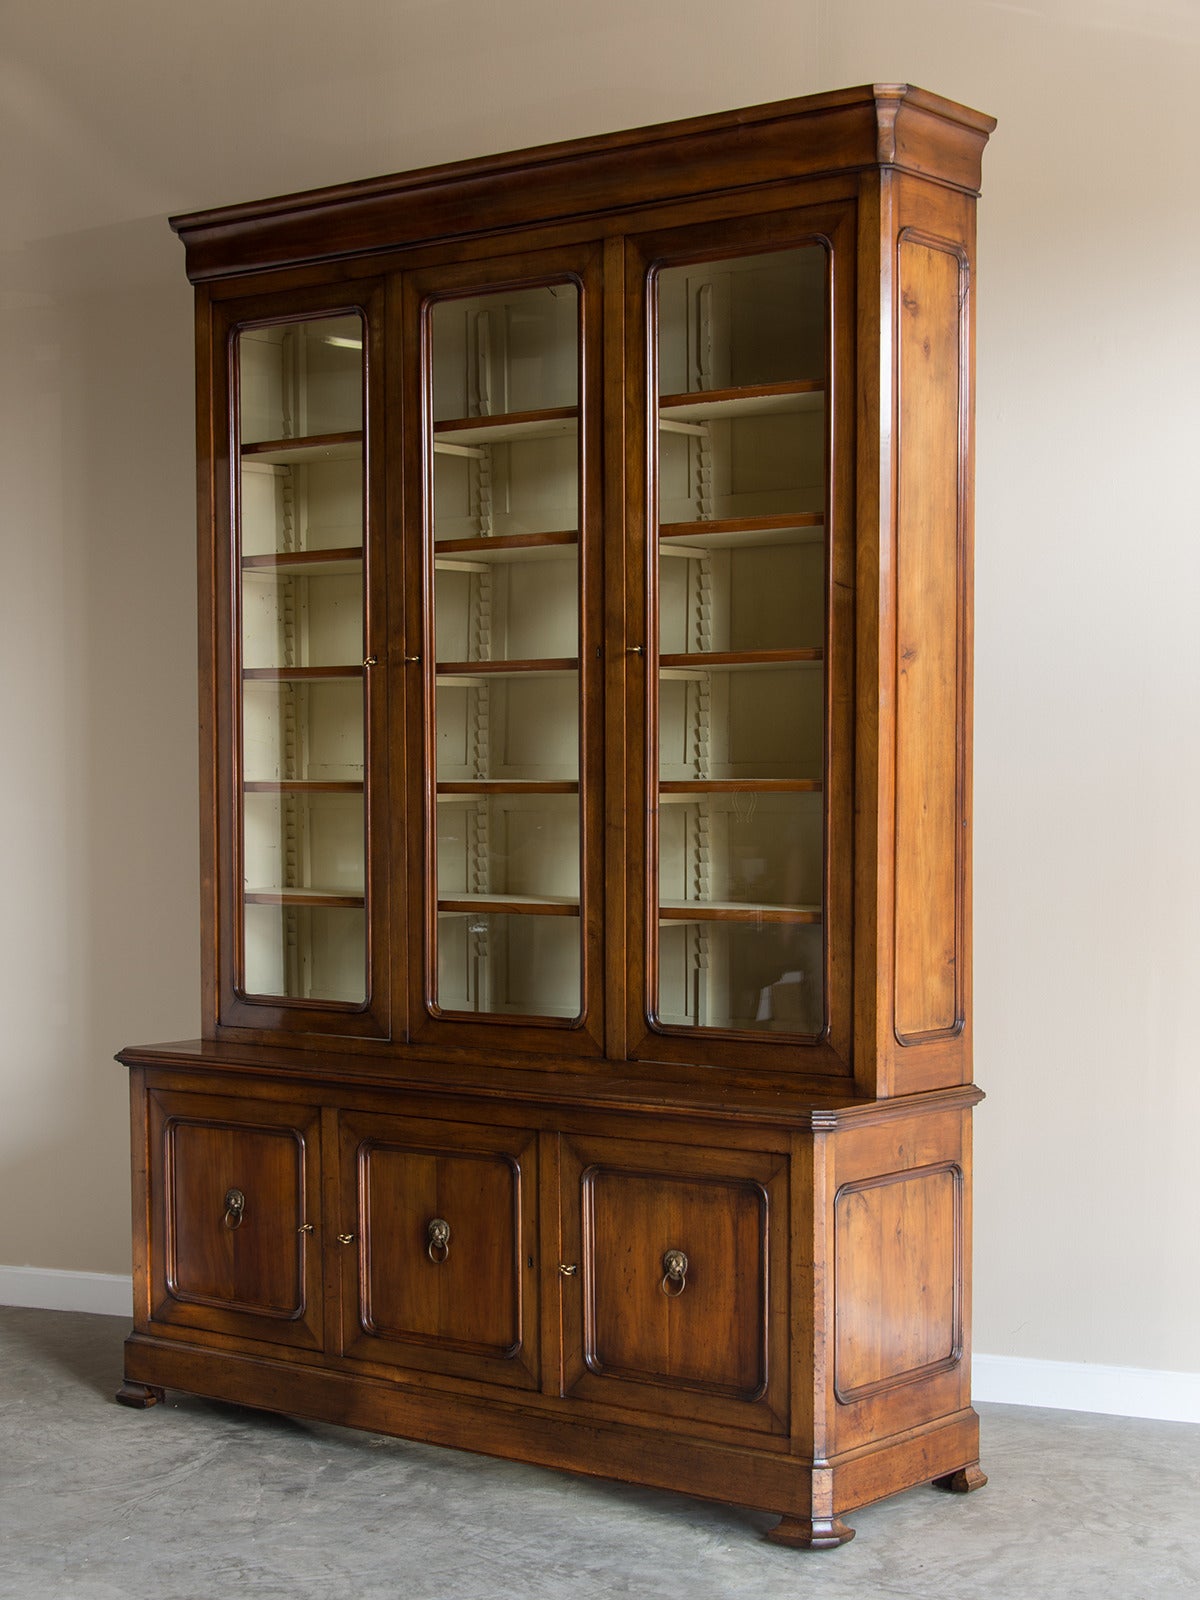 The great scale of this antique French bibliotheque or bookcase is one of its most defining features. Constructed of fine cherrywood and retaining the original glass with its rippled surface the emphasis is on providing ample amounts of display for